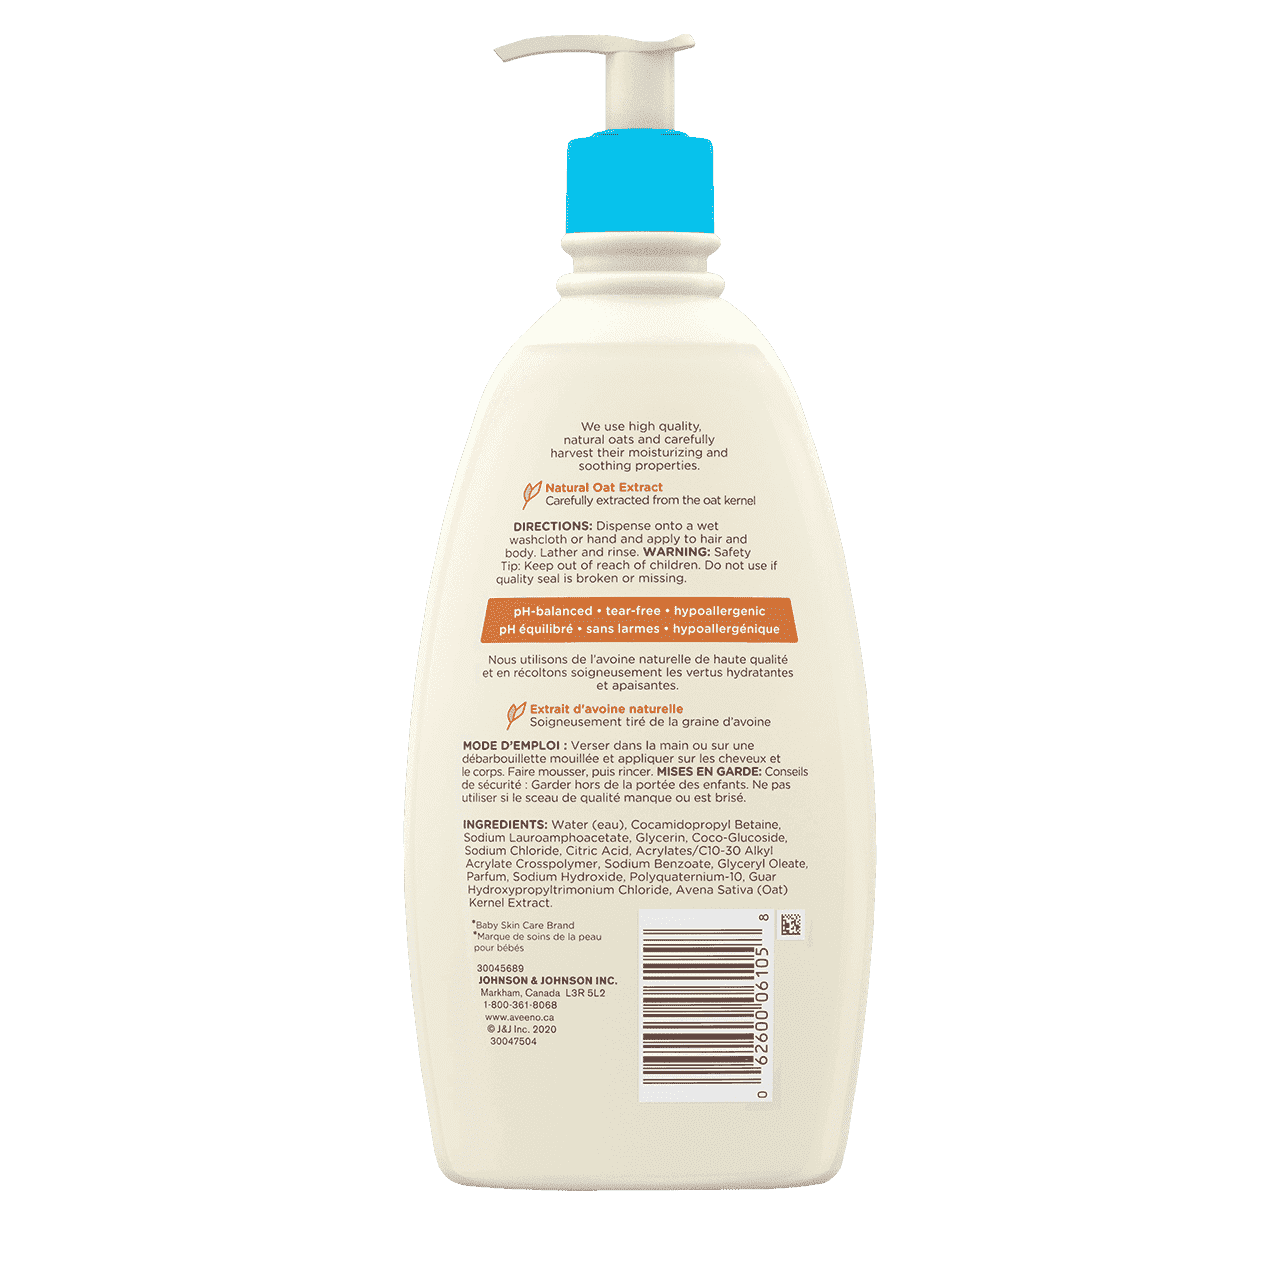 AVEENO® BABY Wash & Shampoo with natural Oat Extract, 532ml bottle, back label